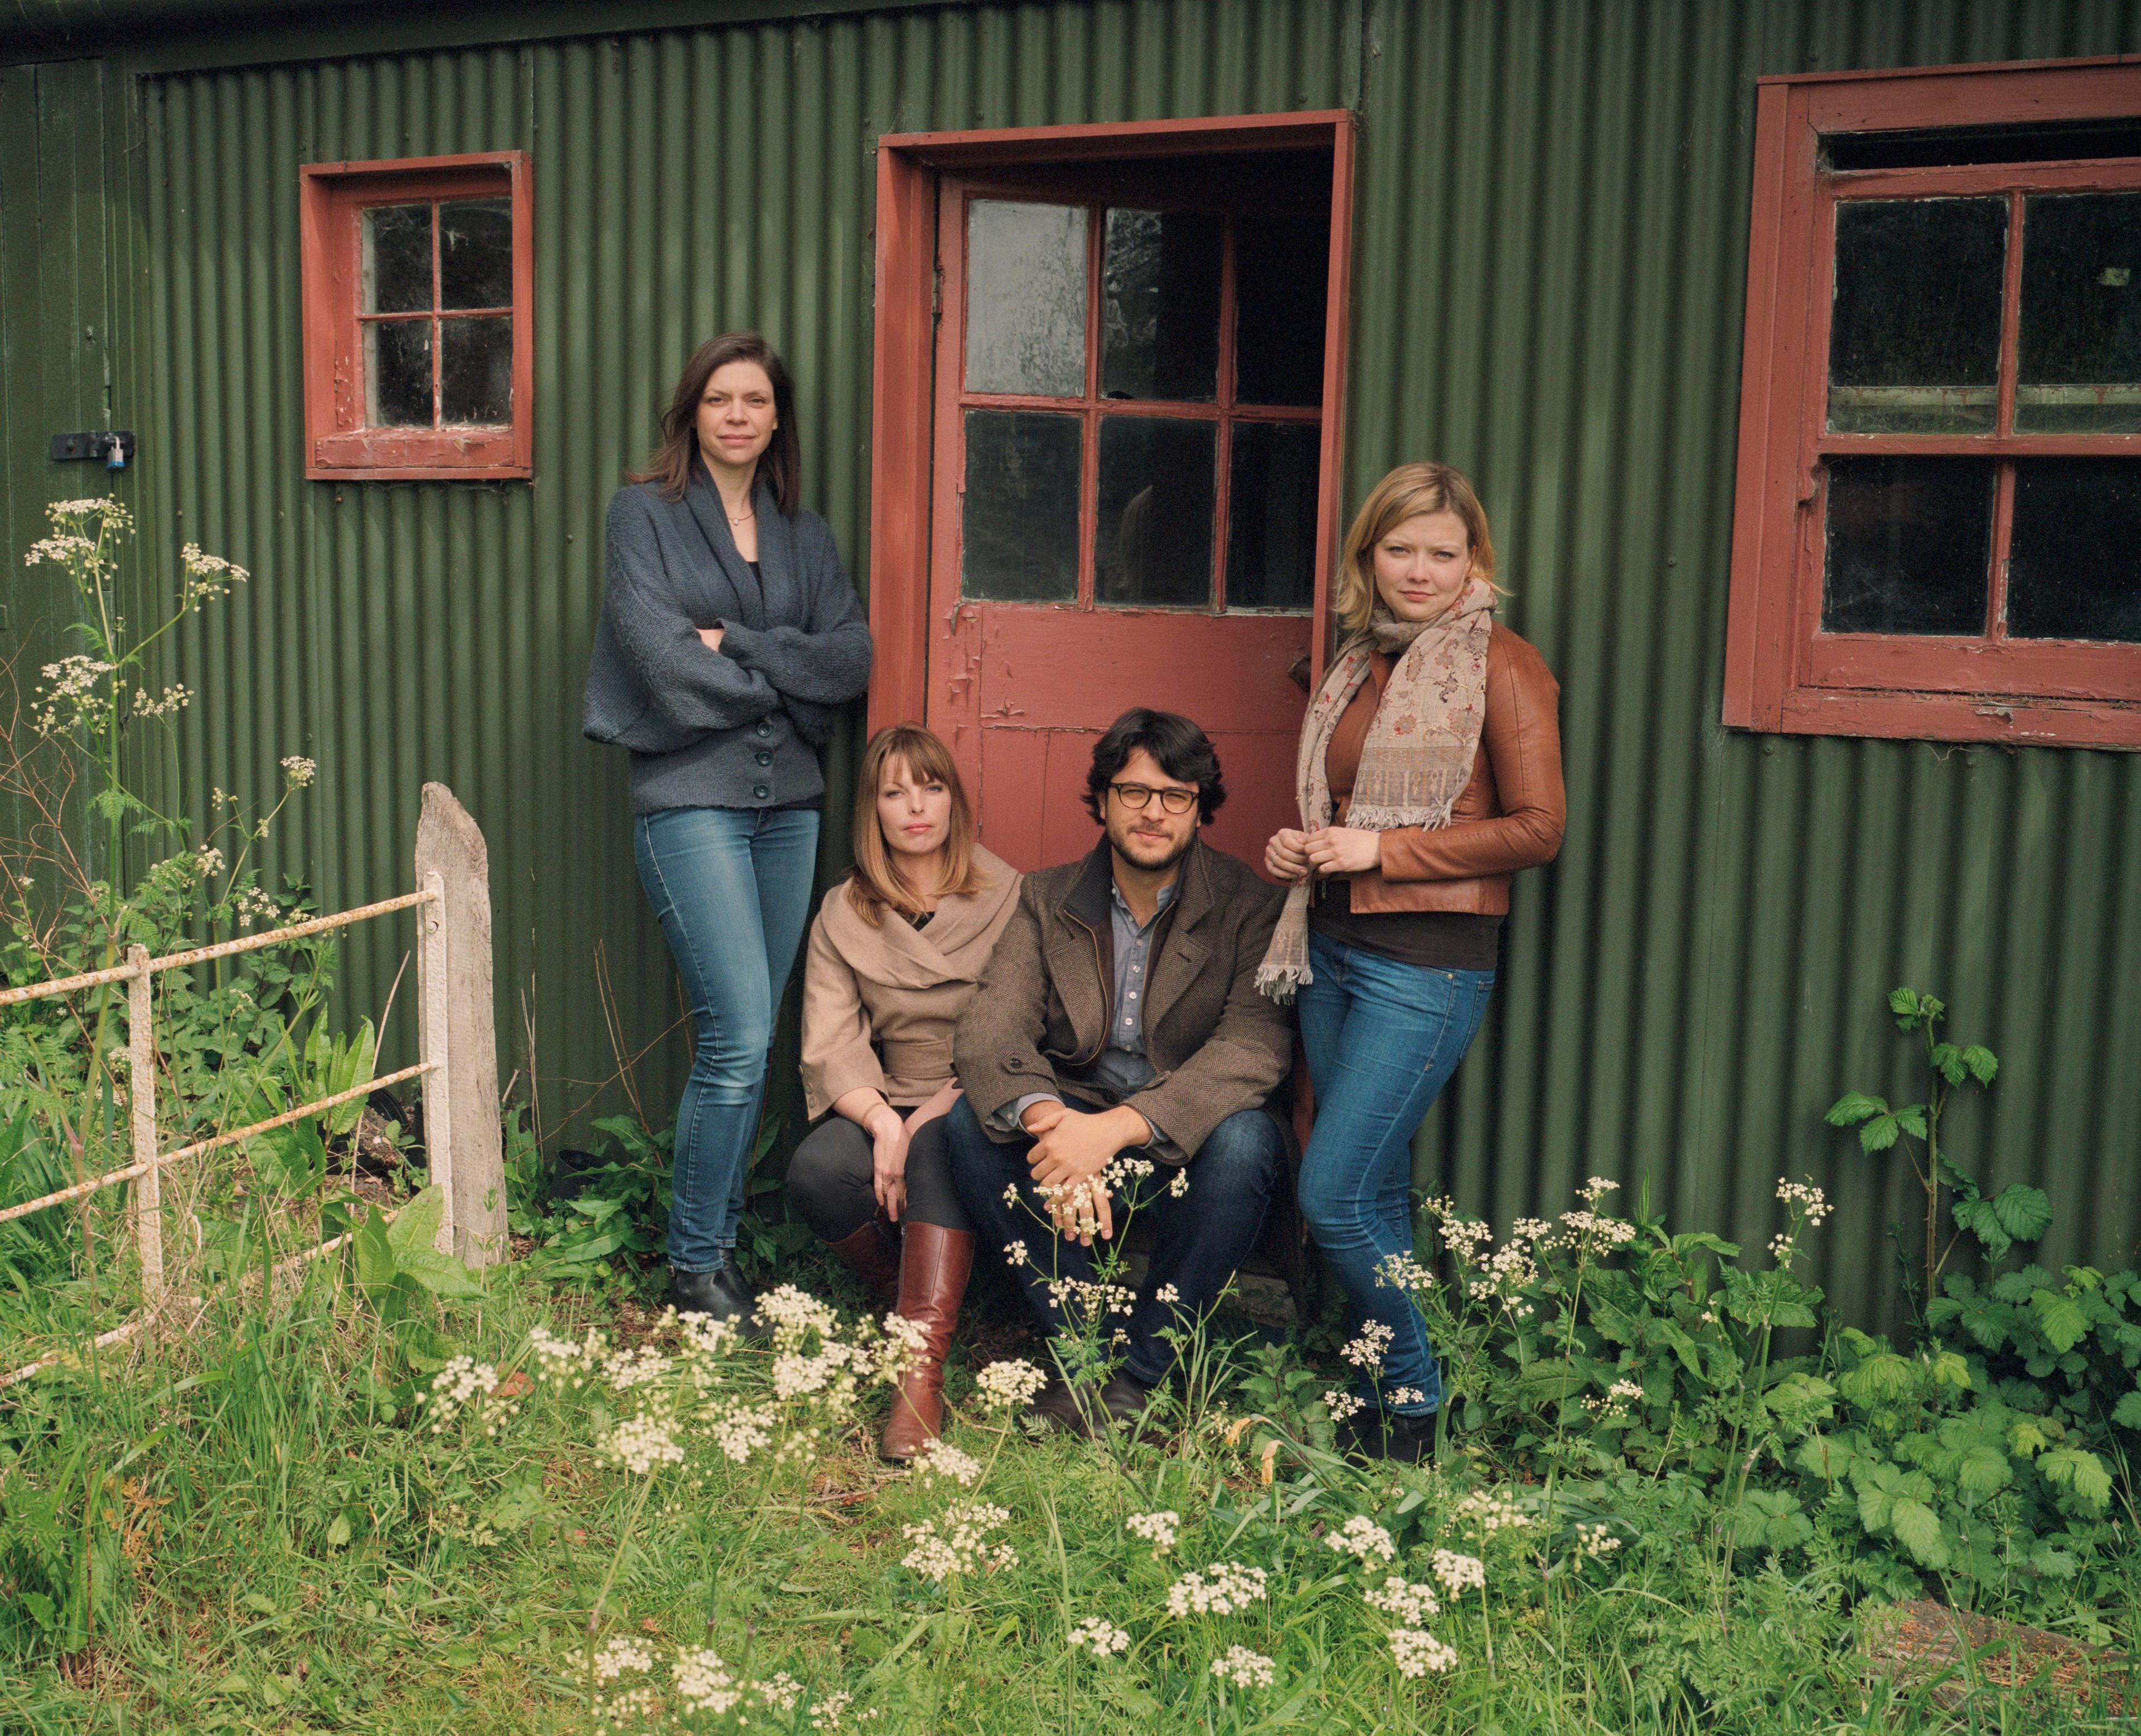 4 musicians standing outside a green corrugated iron shed in a garden